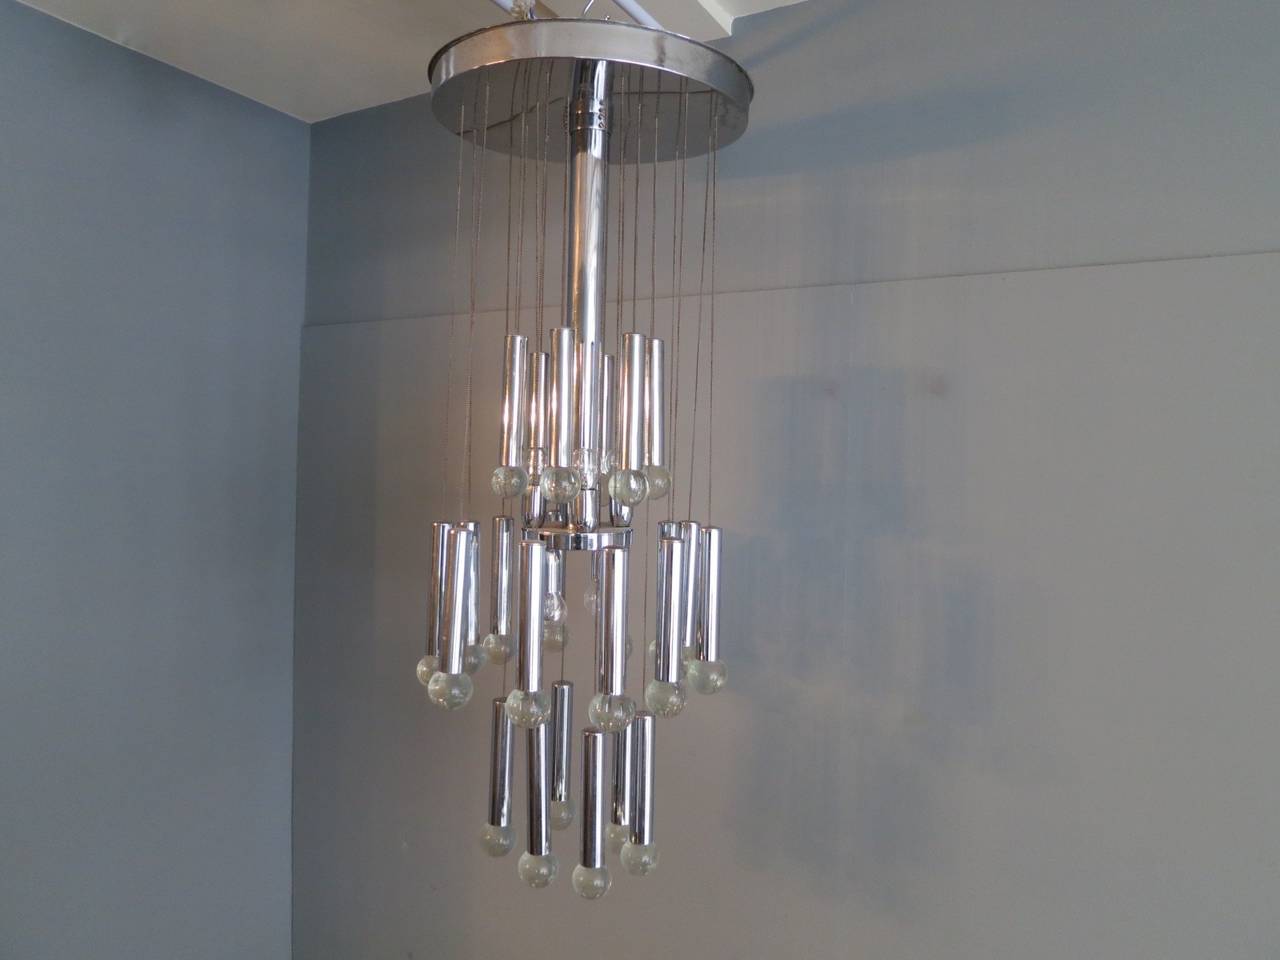 A chrome and glass pendant or chandelier by G. Sciolari, with three tiers of hanging chrome tubes with glass balls and eight lights fitting in the centre.